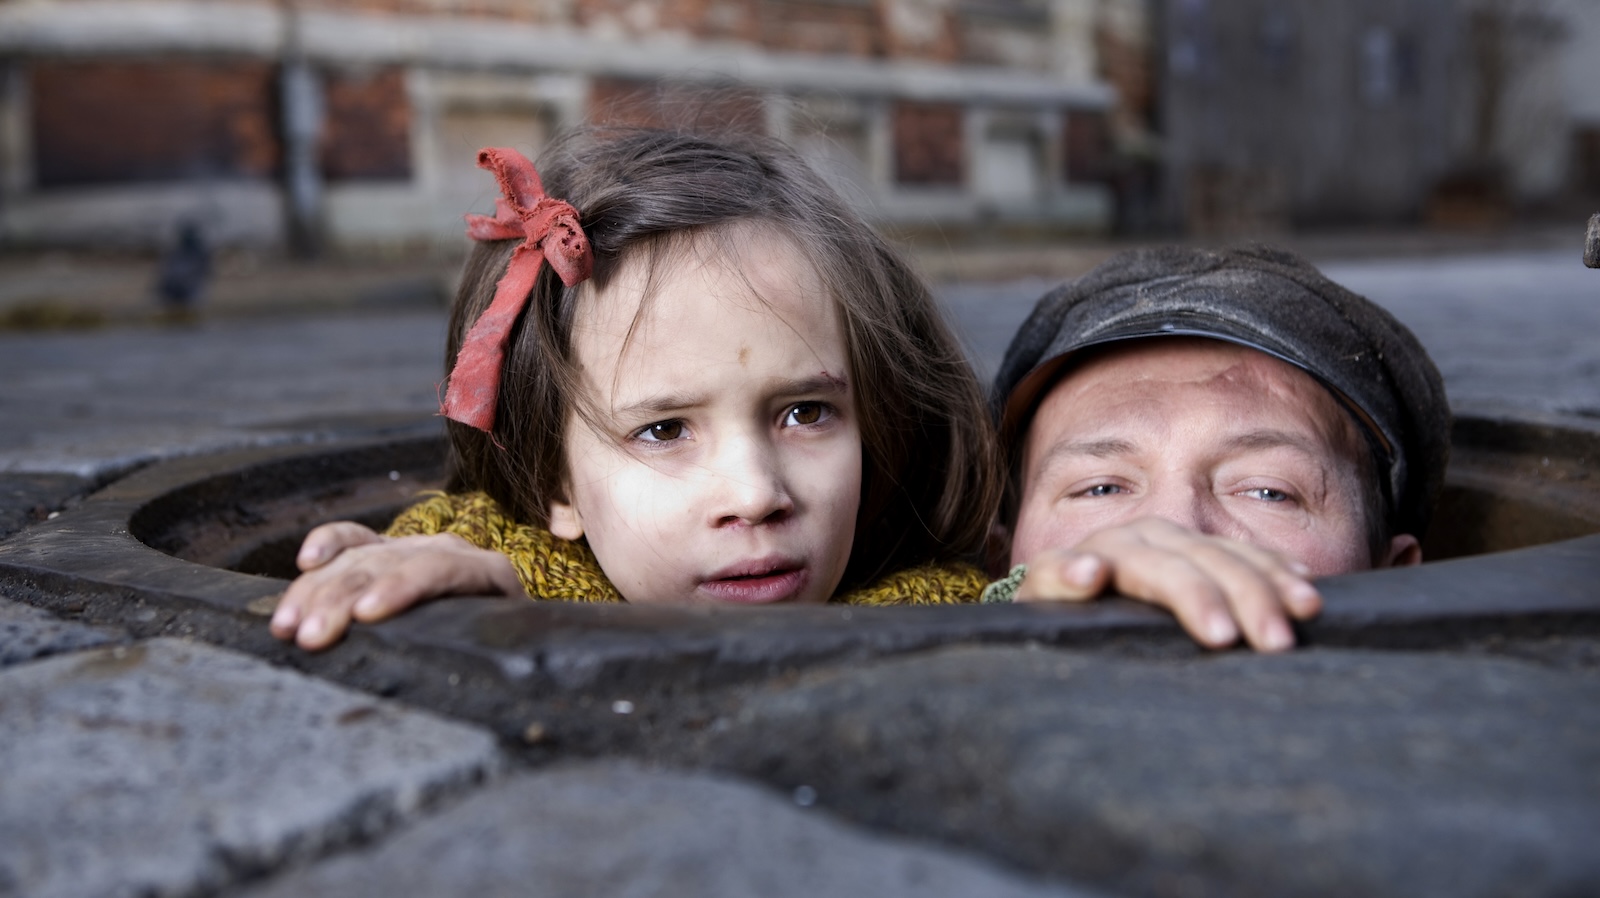 Two children, the girl with a red ribbon in her hair and a boy with a cap, poke their heads out of a sewer grate